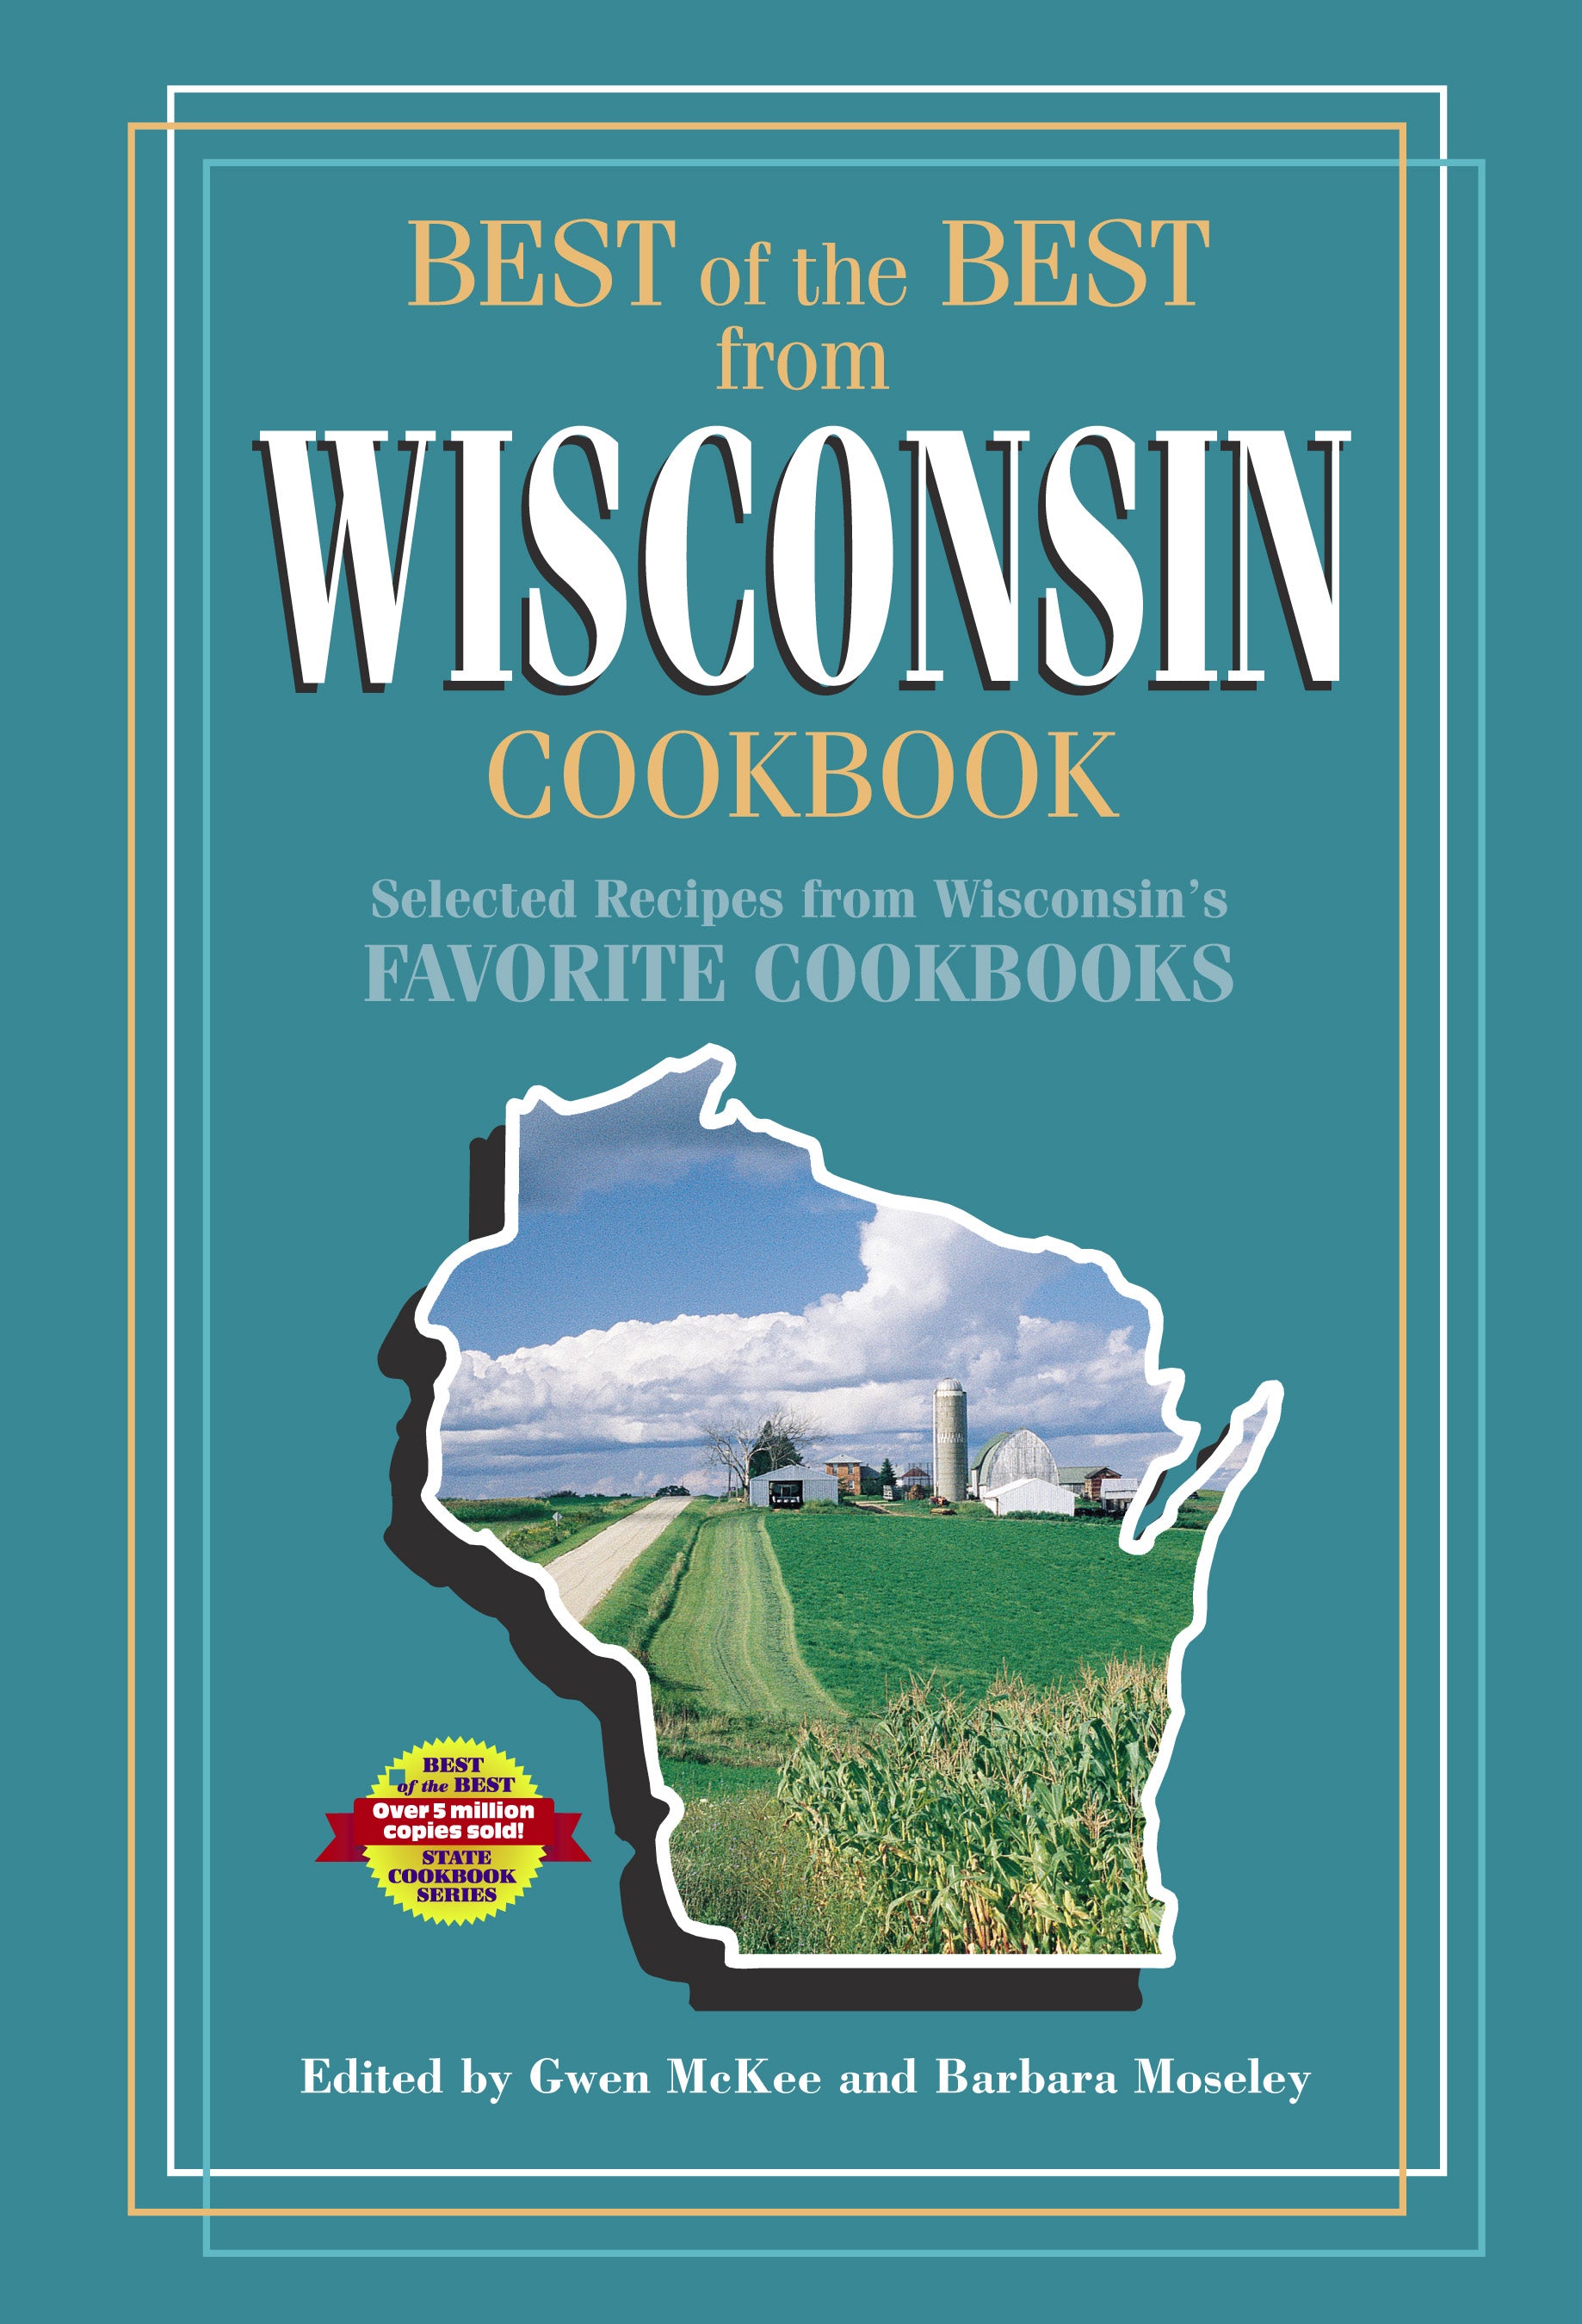 Best of the Best from Wisconsin Cookbook: Selected Recipes from Wisconsin's Favorite Cookbooks